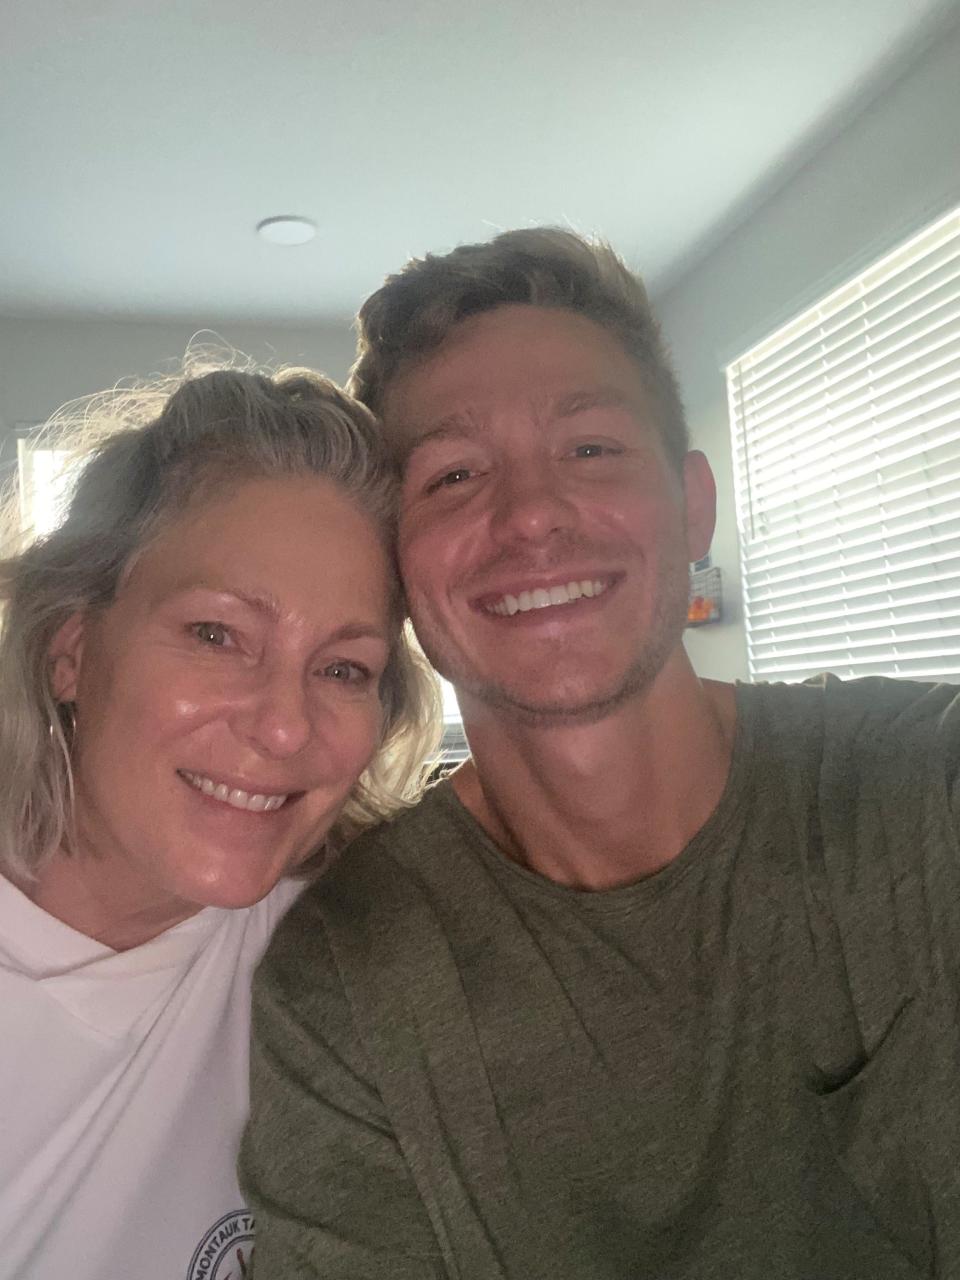 Joseph Havrilla with his mother, Stacey Morris, who reported him missing in 2022. His remains were found four months later in front of a Publix in Riviera Beach.